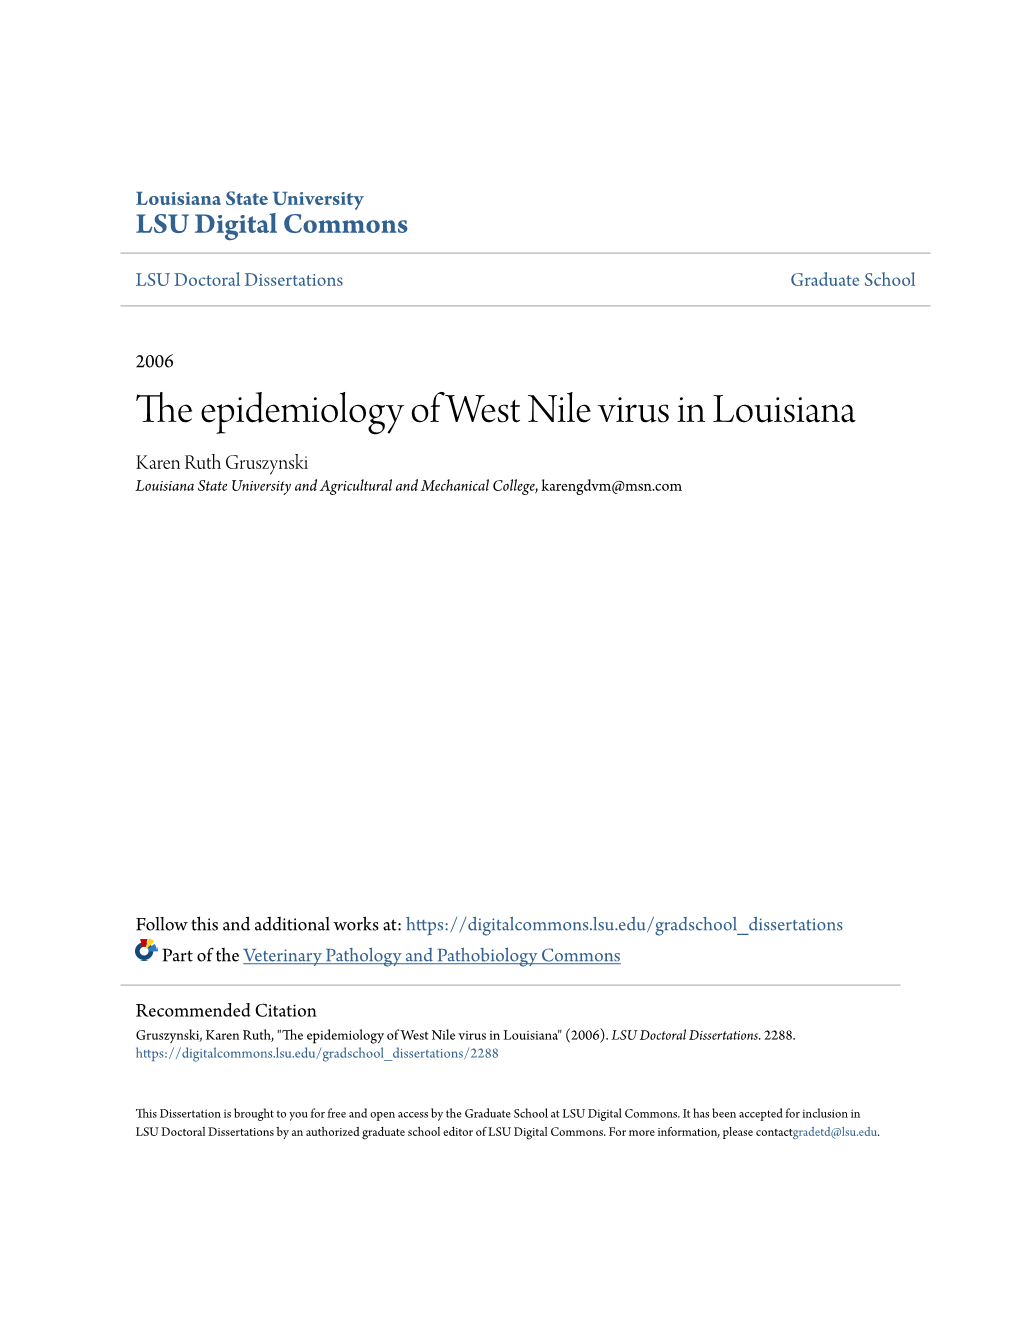 The Epidemiology of West Nile Virus in Louisiana Karen Ruth Gruszynski Louisiana State University and Agricultural and Mechanical College, Karengdvm@Msn.Com